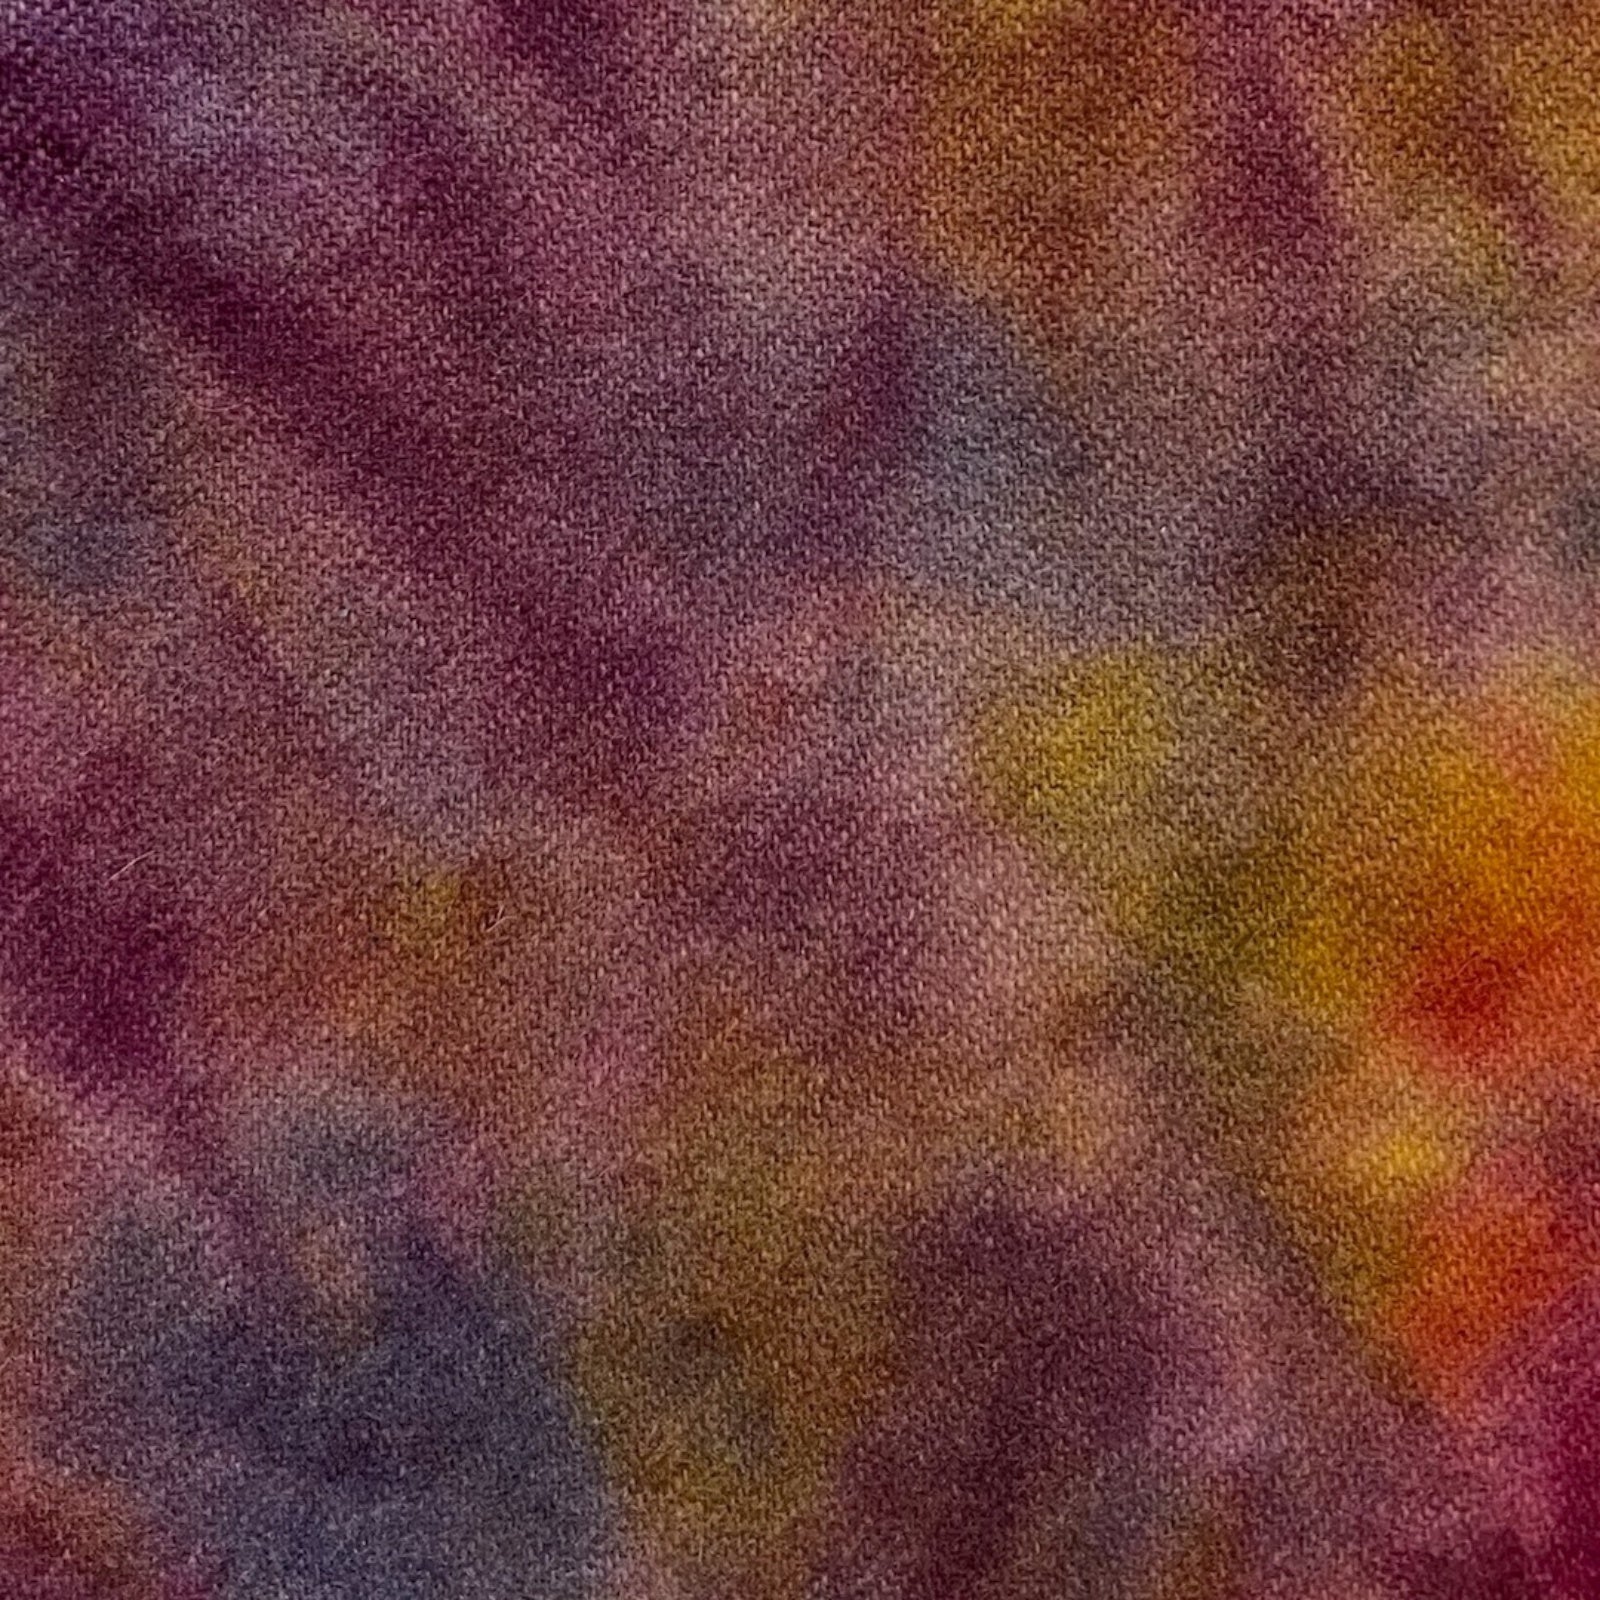 Wildflowers - Colorama Hand Dyed Wool - Offered by HoneyBee Hive Rug Hooking